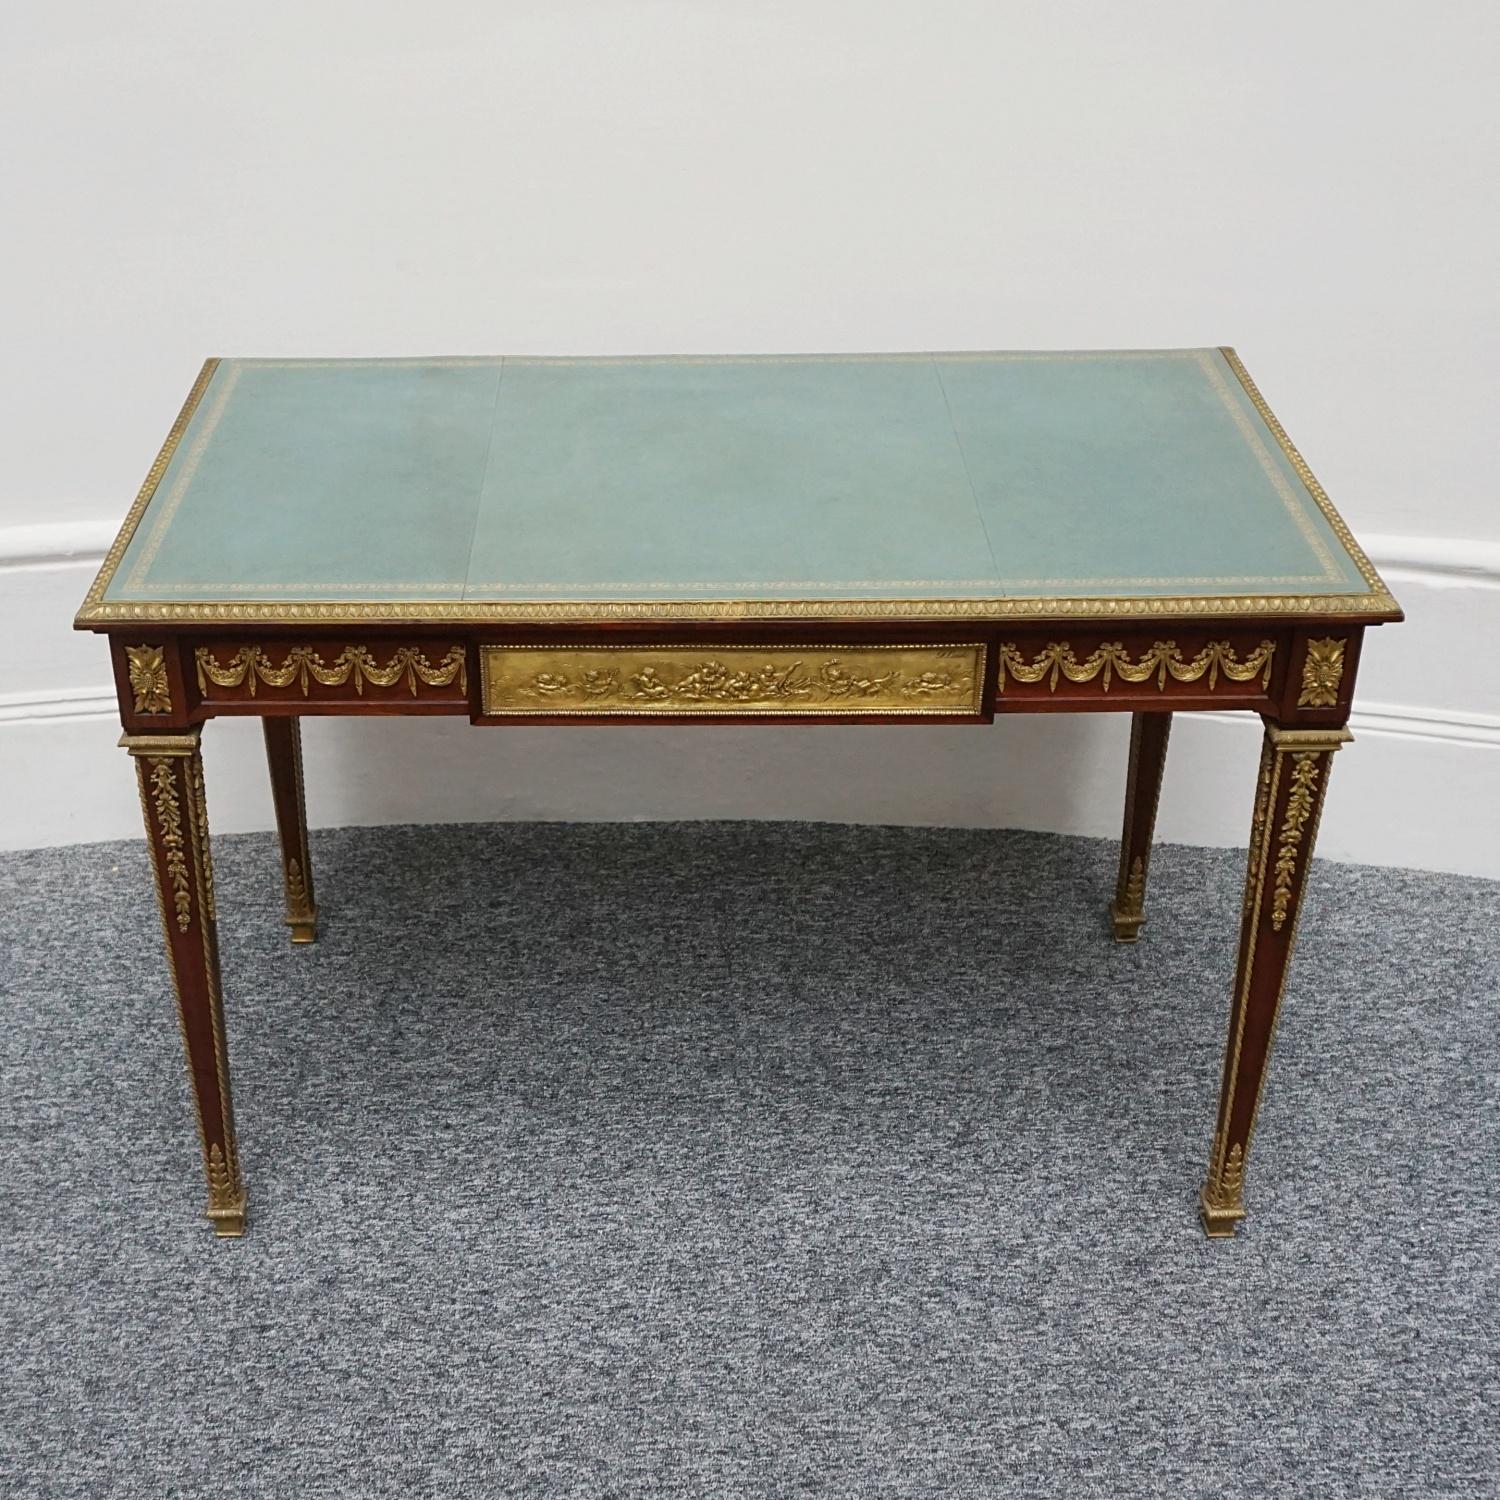 A Louis XVI style gilt-bronze mounted Kingwood veneered writing table with original inset green leather top. Signed F.Linke to front gilt bronze panelled drawer. Excellent original condition. 

Dimensions: H 72.5cm W 110cm D 61cm

Origin: